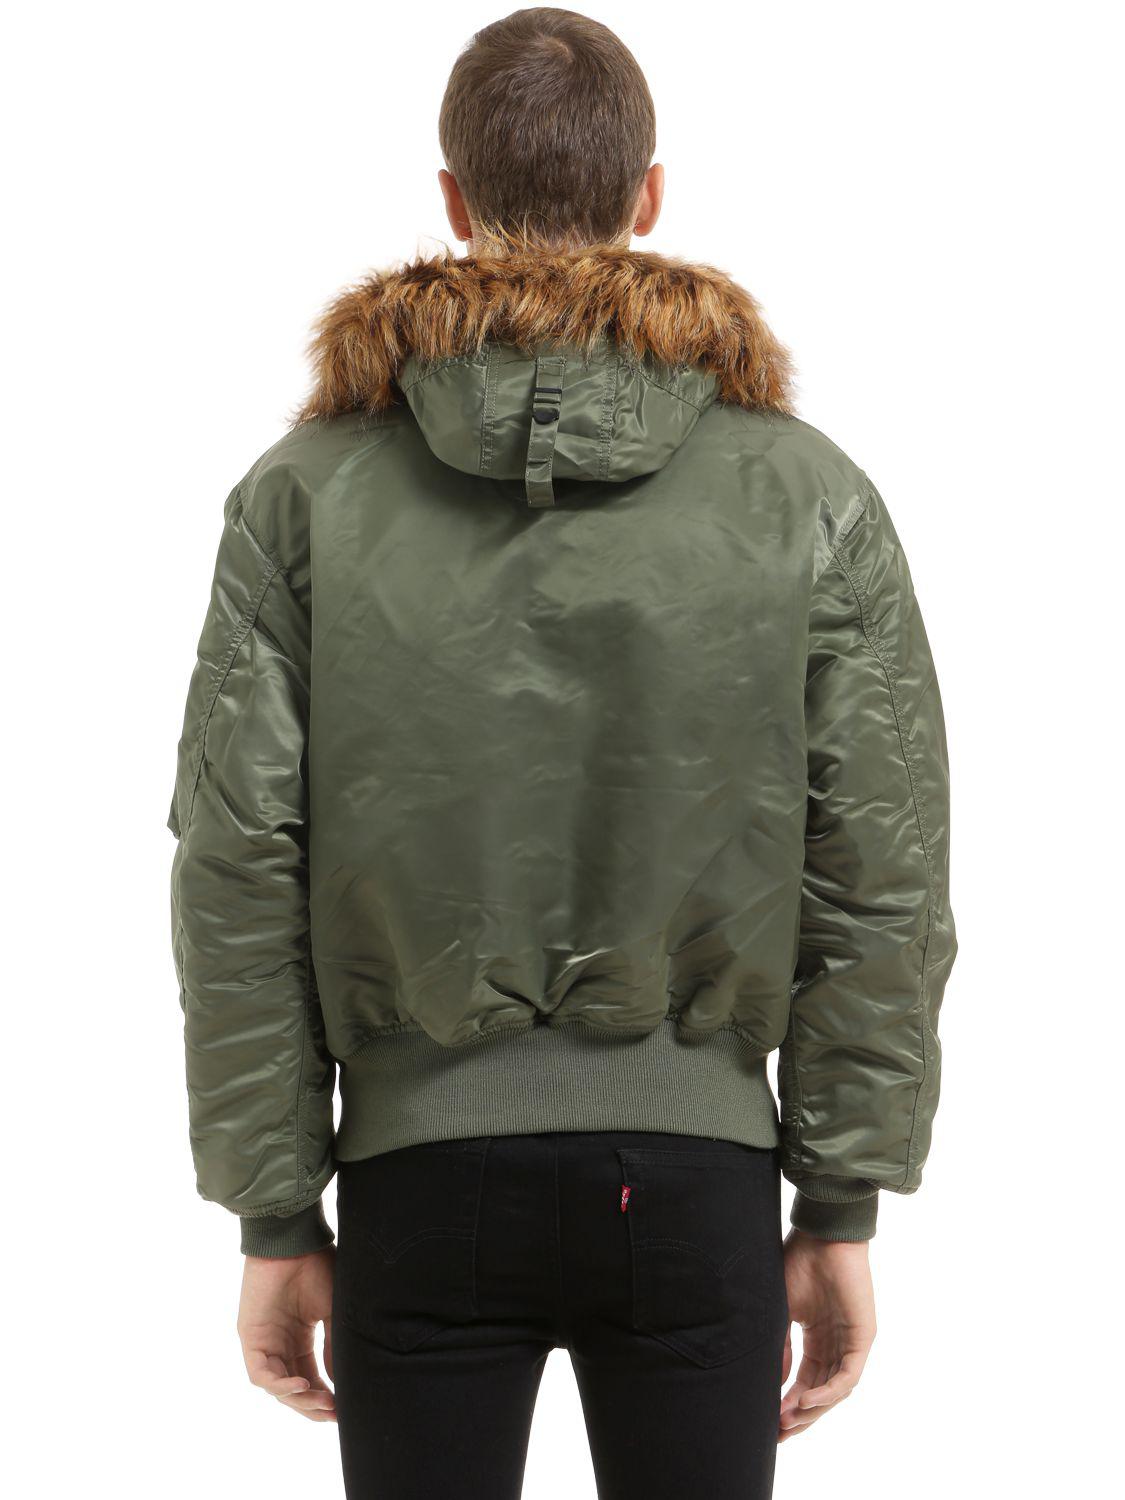 Alpha Industries 45/p Hooded Oversized Bomber Jacket in Sage Green (Green)  for Men - Lyst